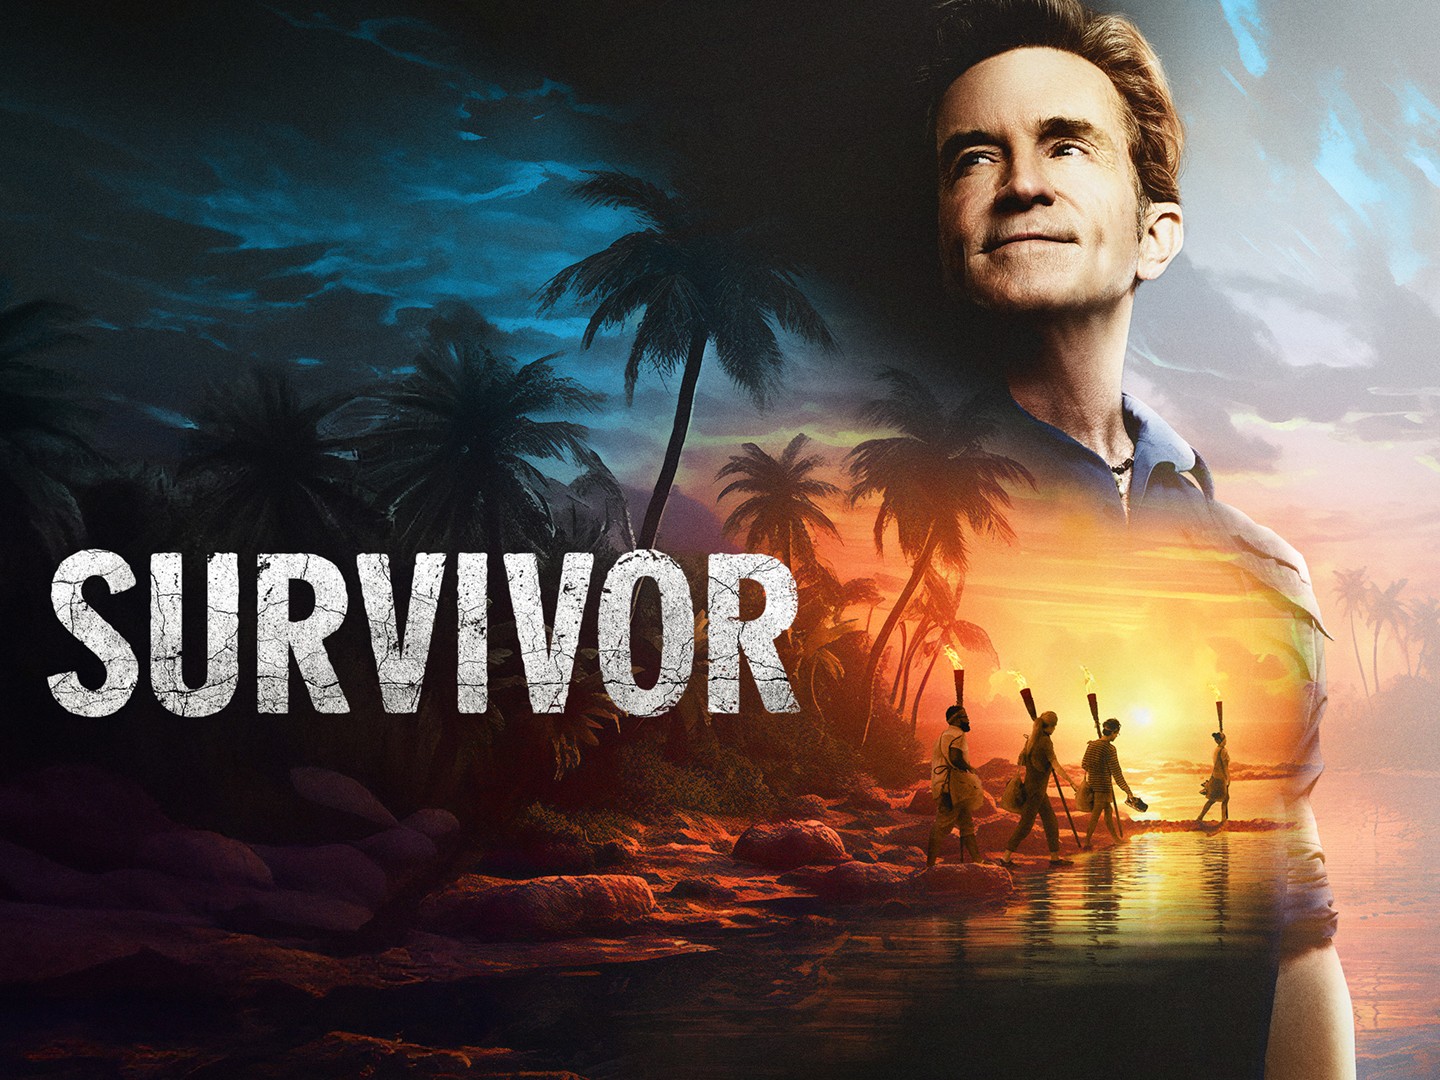 The 3 Best and 3 Worst Players on 'Survivor 45